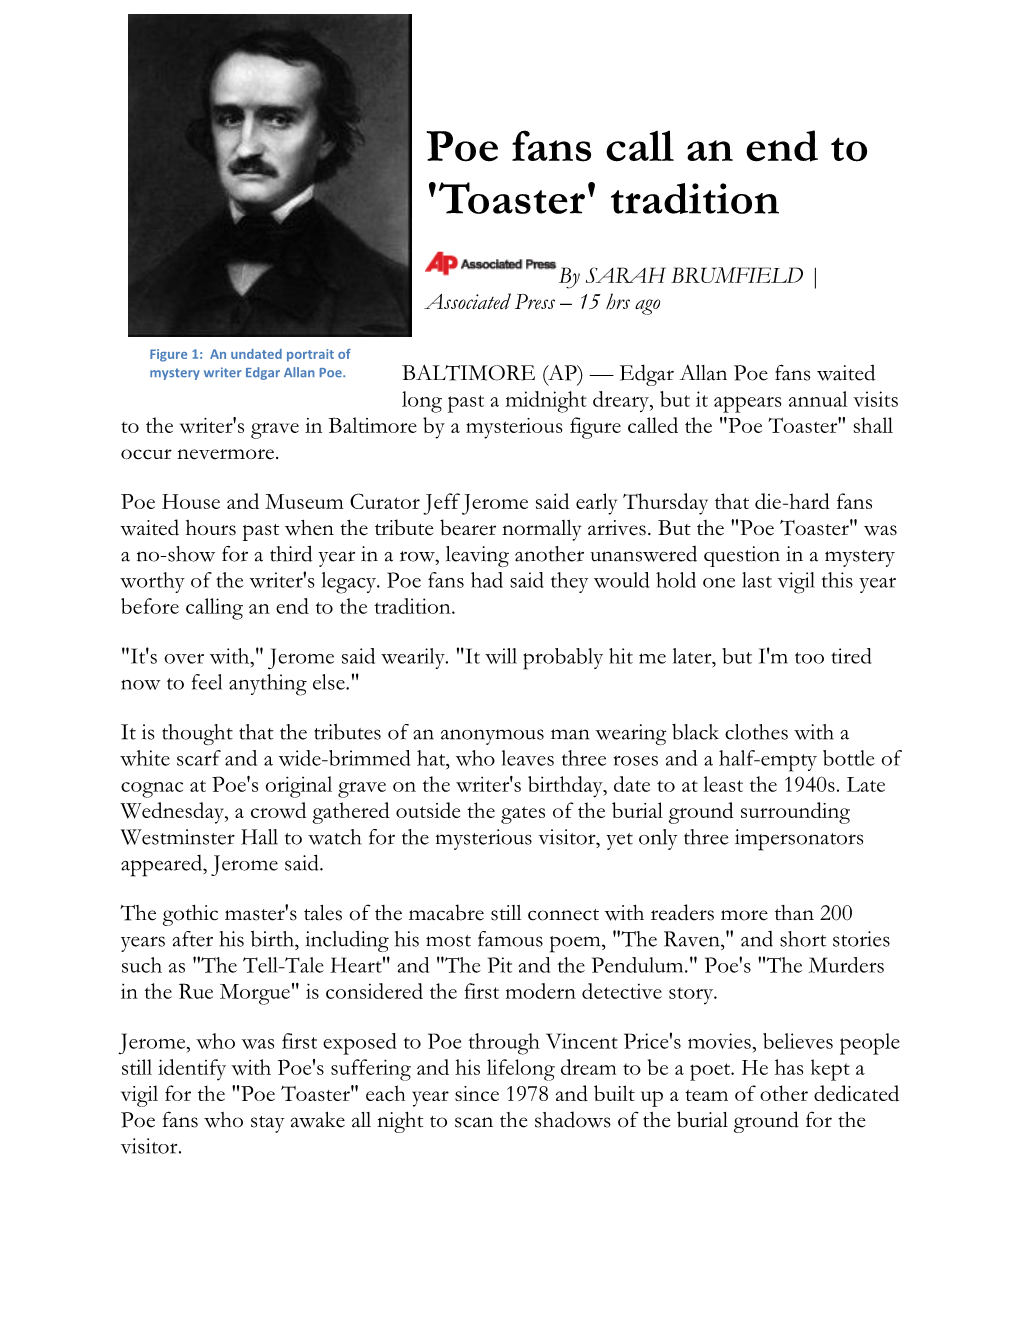 Poe Fans Call an End to 'Toaster' Tradition